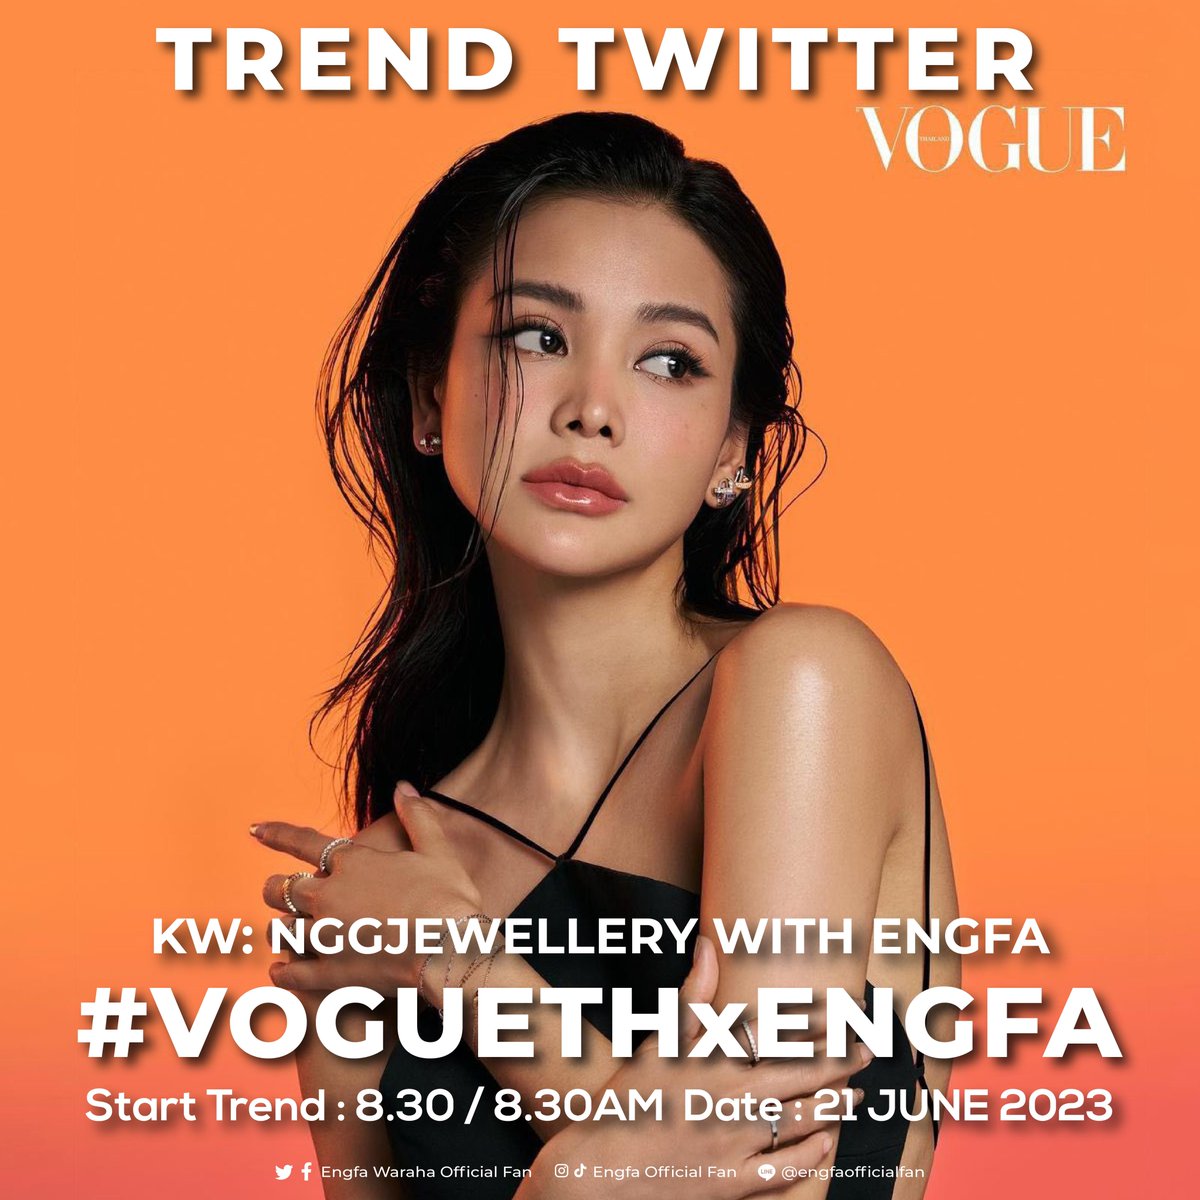 Guys, 

Engfa has a photo shoot with Vogue Thailand for NGG JEWELLERY, so to help promote Engfa, the magazine, and the jewelry brand, we will  have a KW & a hashtag trends as follows: 

KW: NGGJEWELLERY WITH ENGFA
#.VOGUETHxENGFA
Start Trend : 8:30AM (GMT+7)
Date : JUNE21st ‘23…